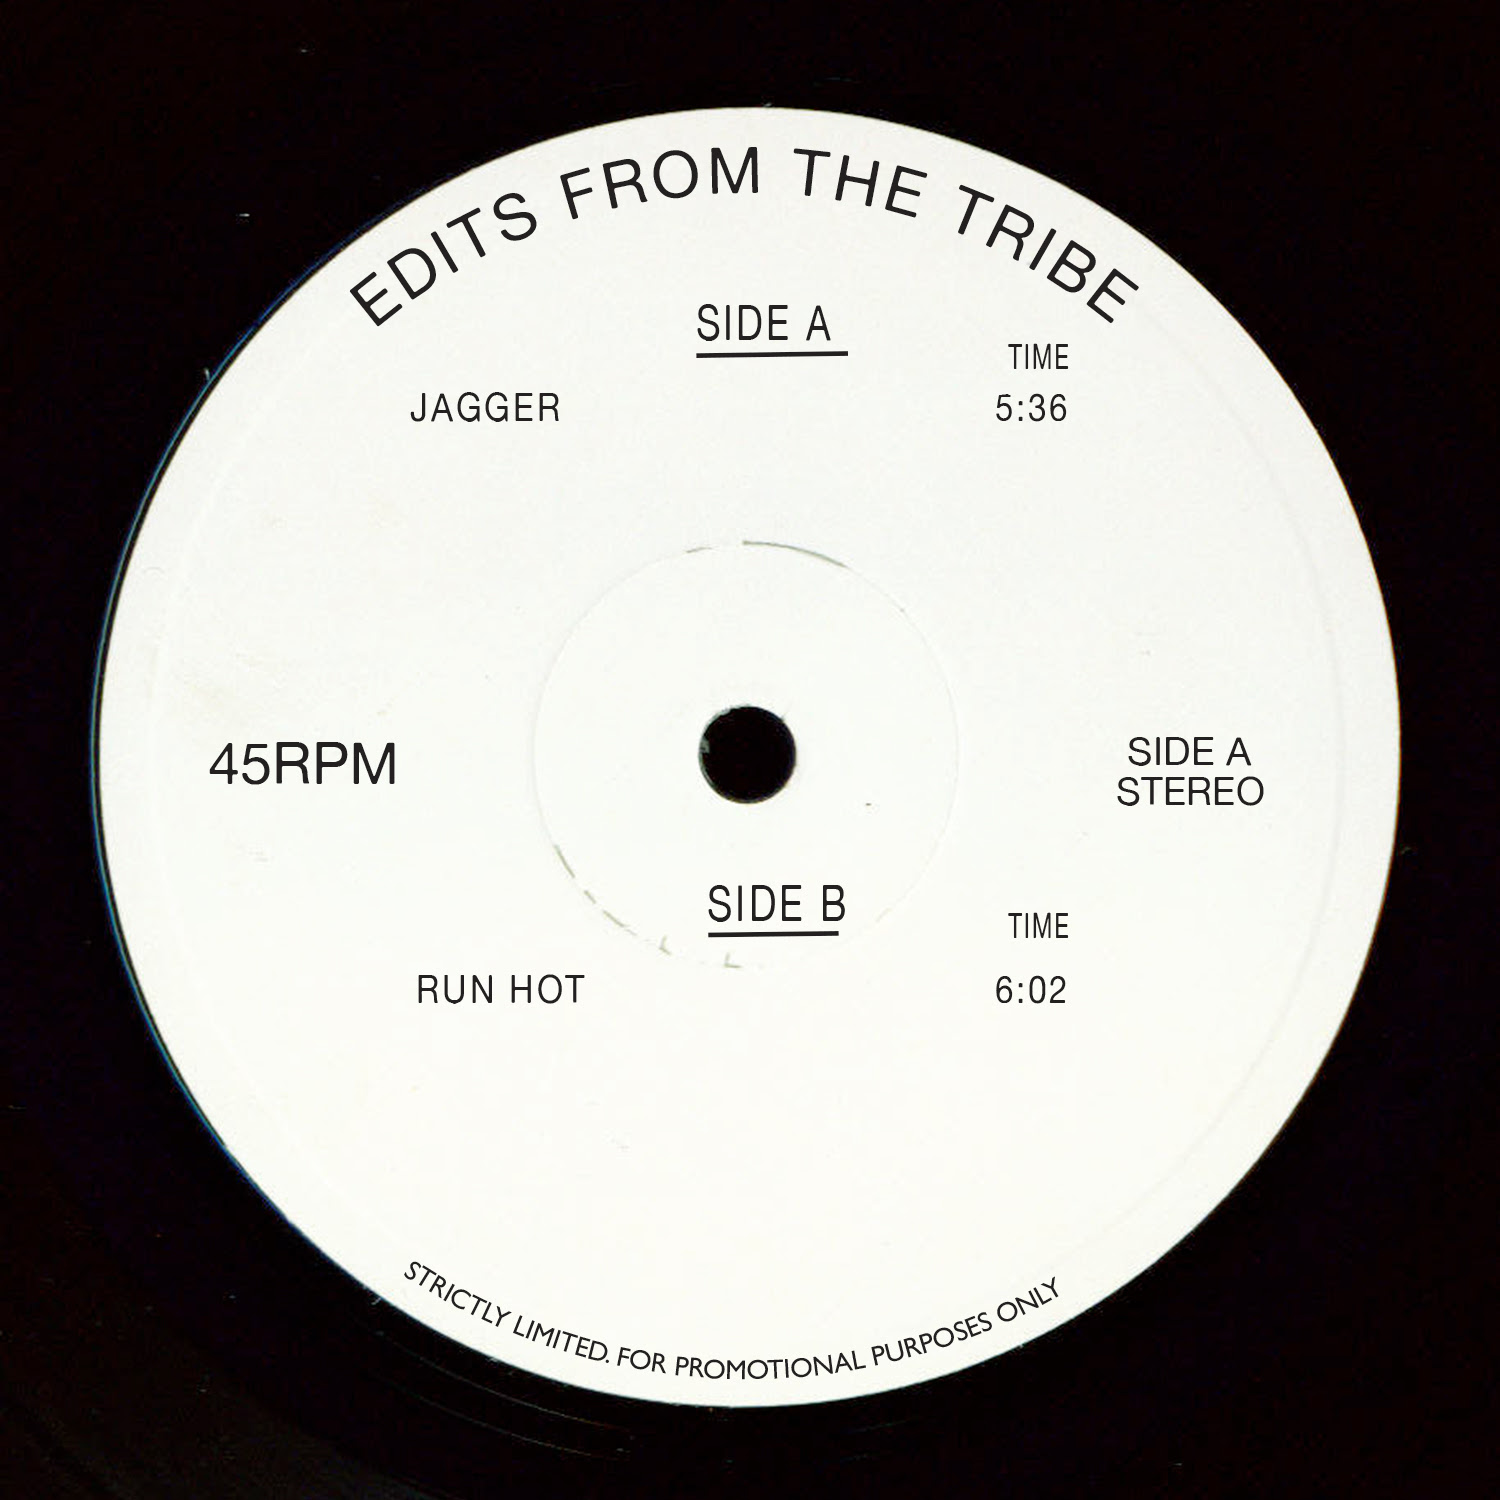 Adesse Versions/EDITS FROM THE TRIBE 12"